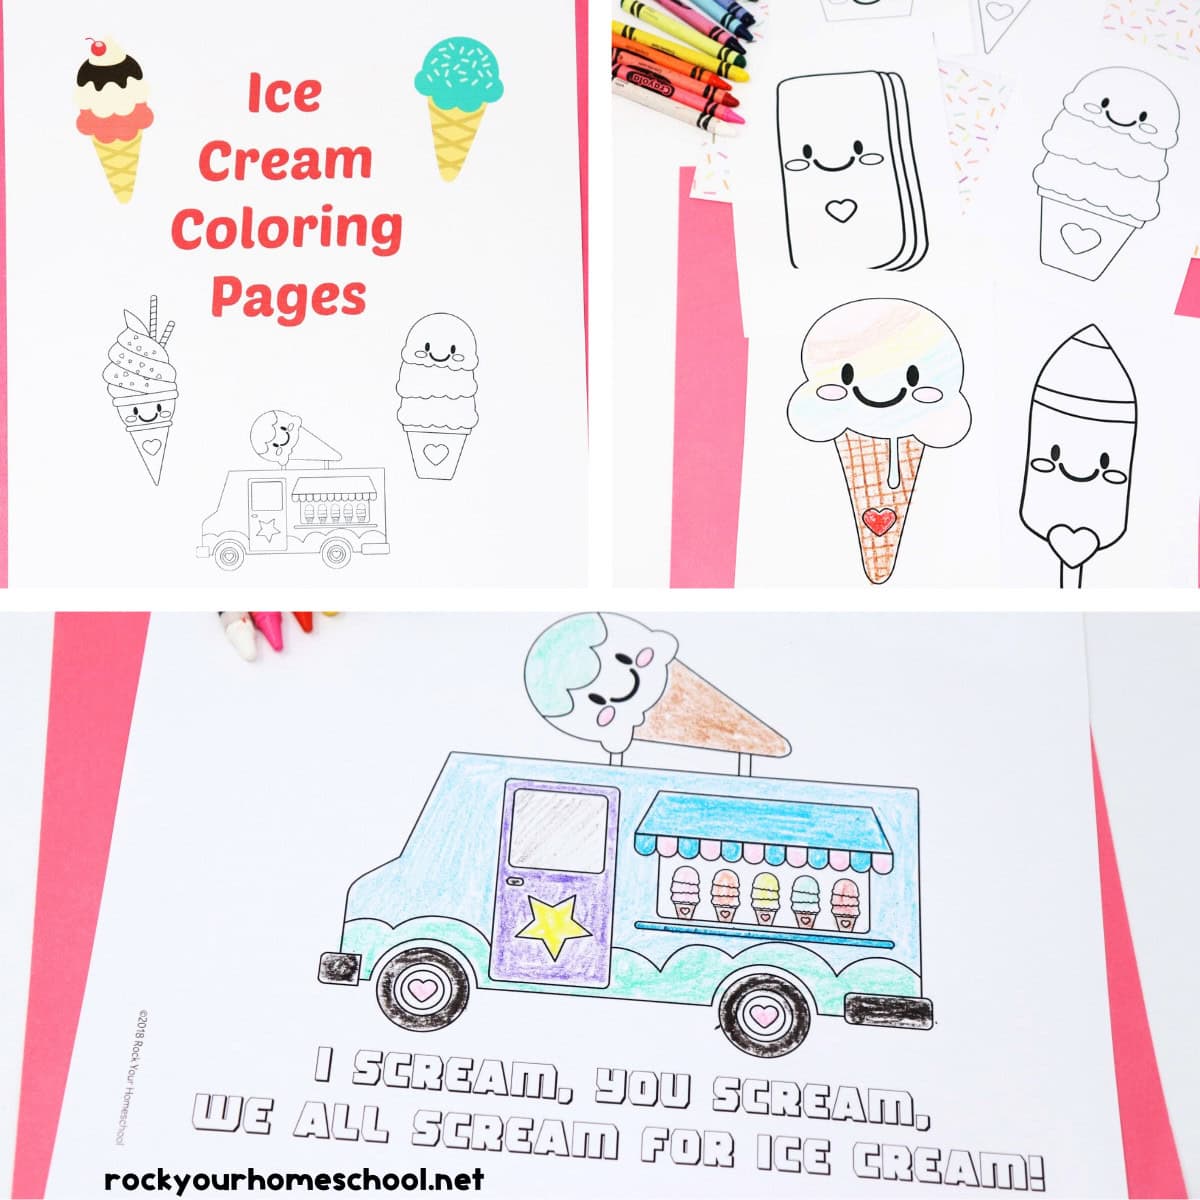 Examples of free printable ice cream coloring pages.